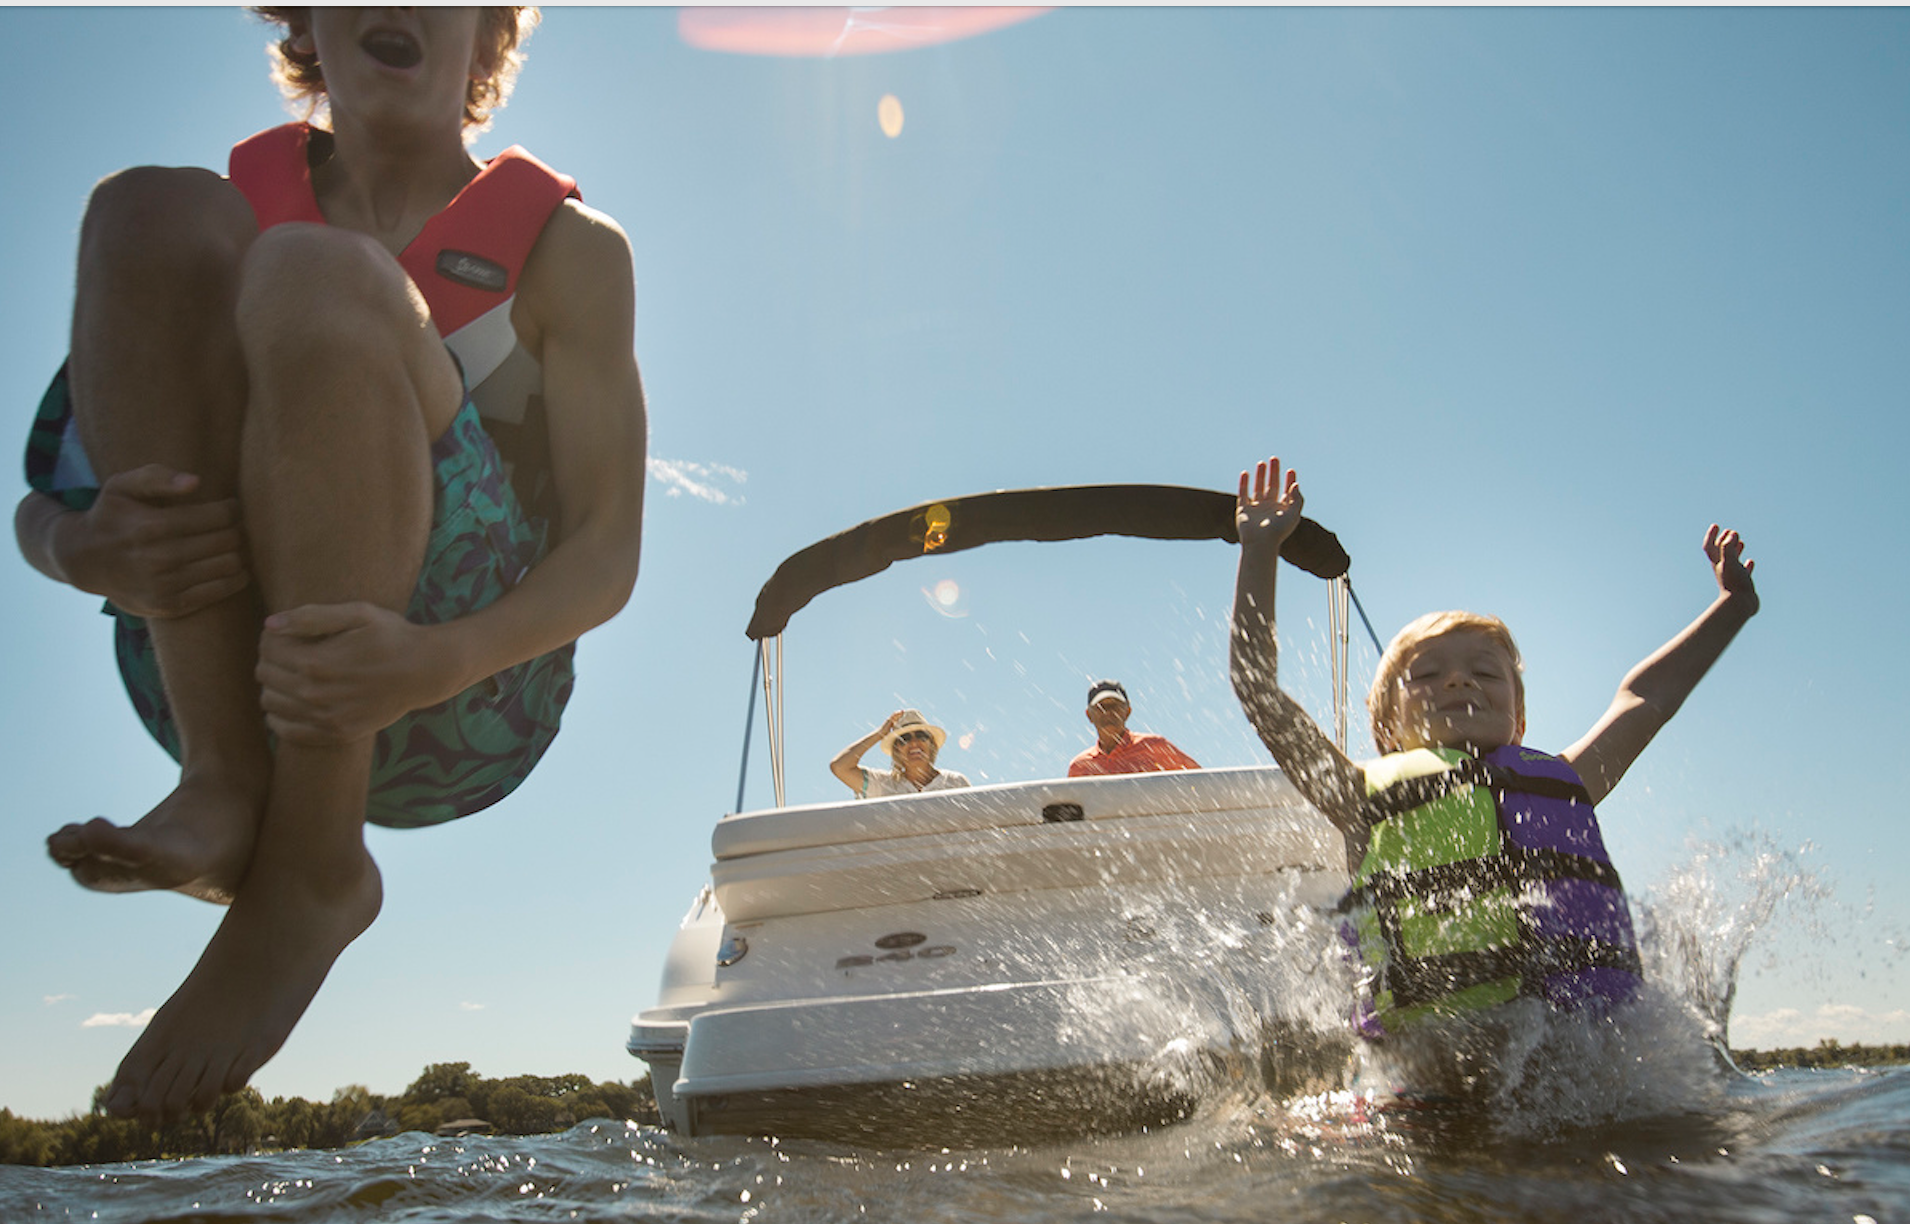 kids jumping off a boat, family fun on a boat